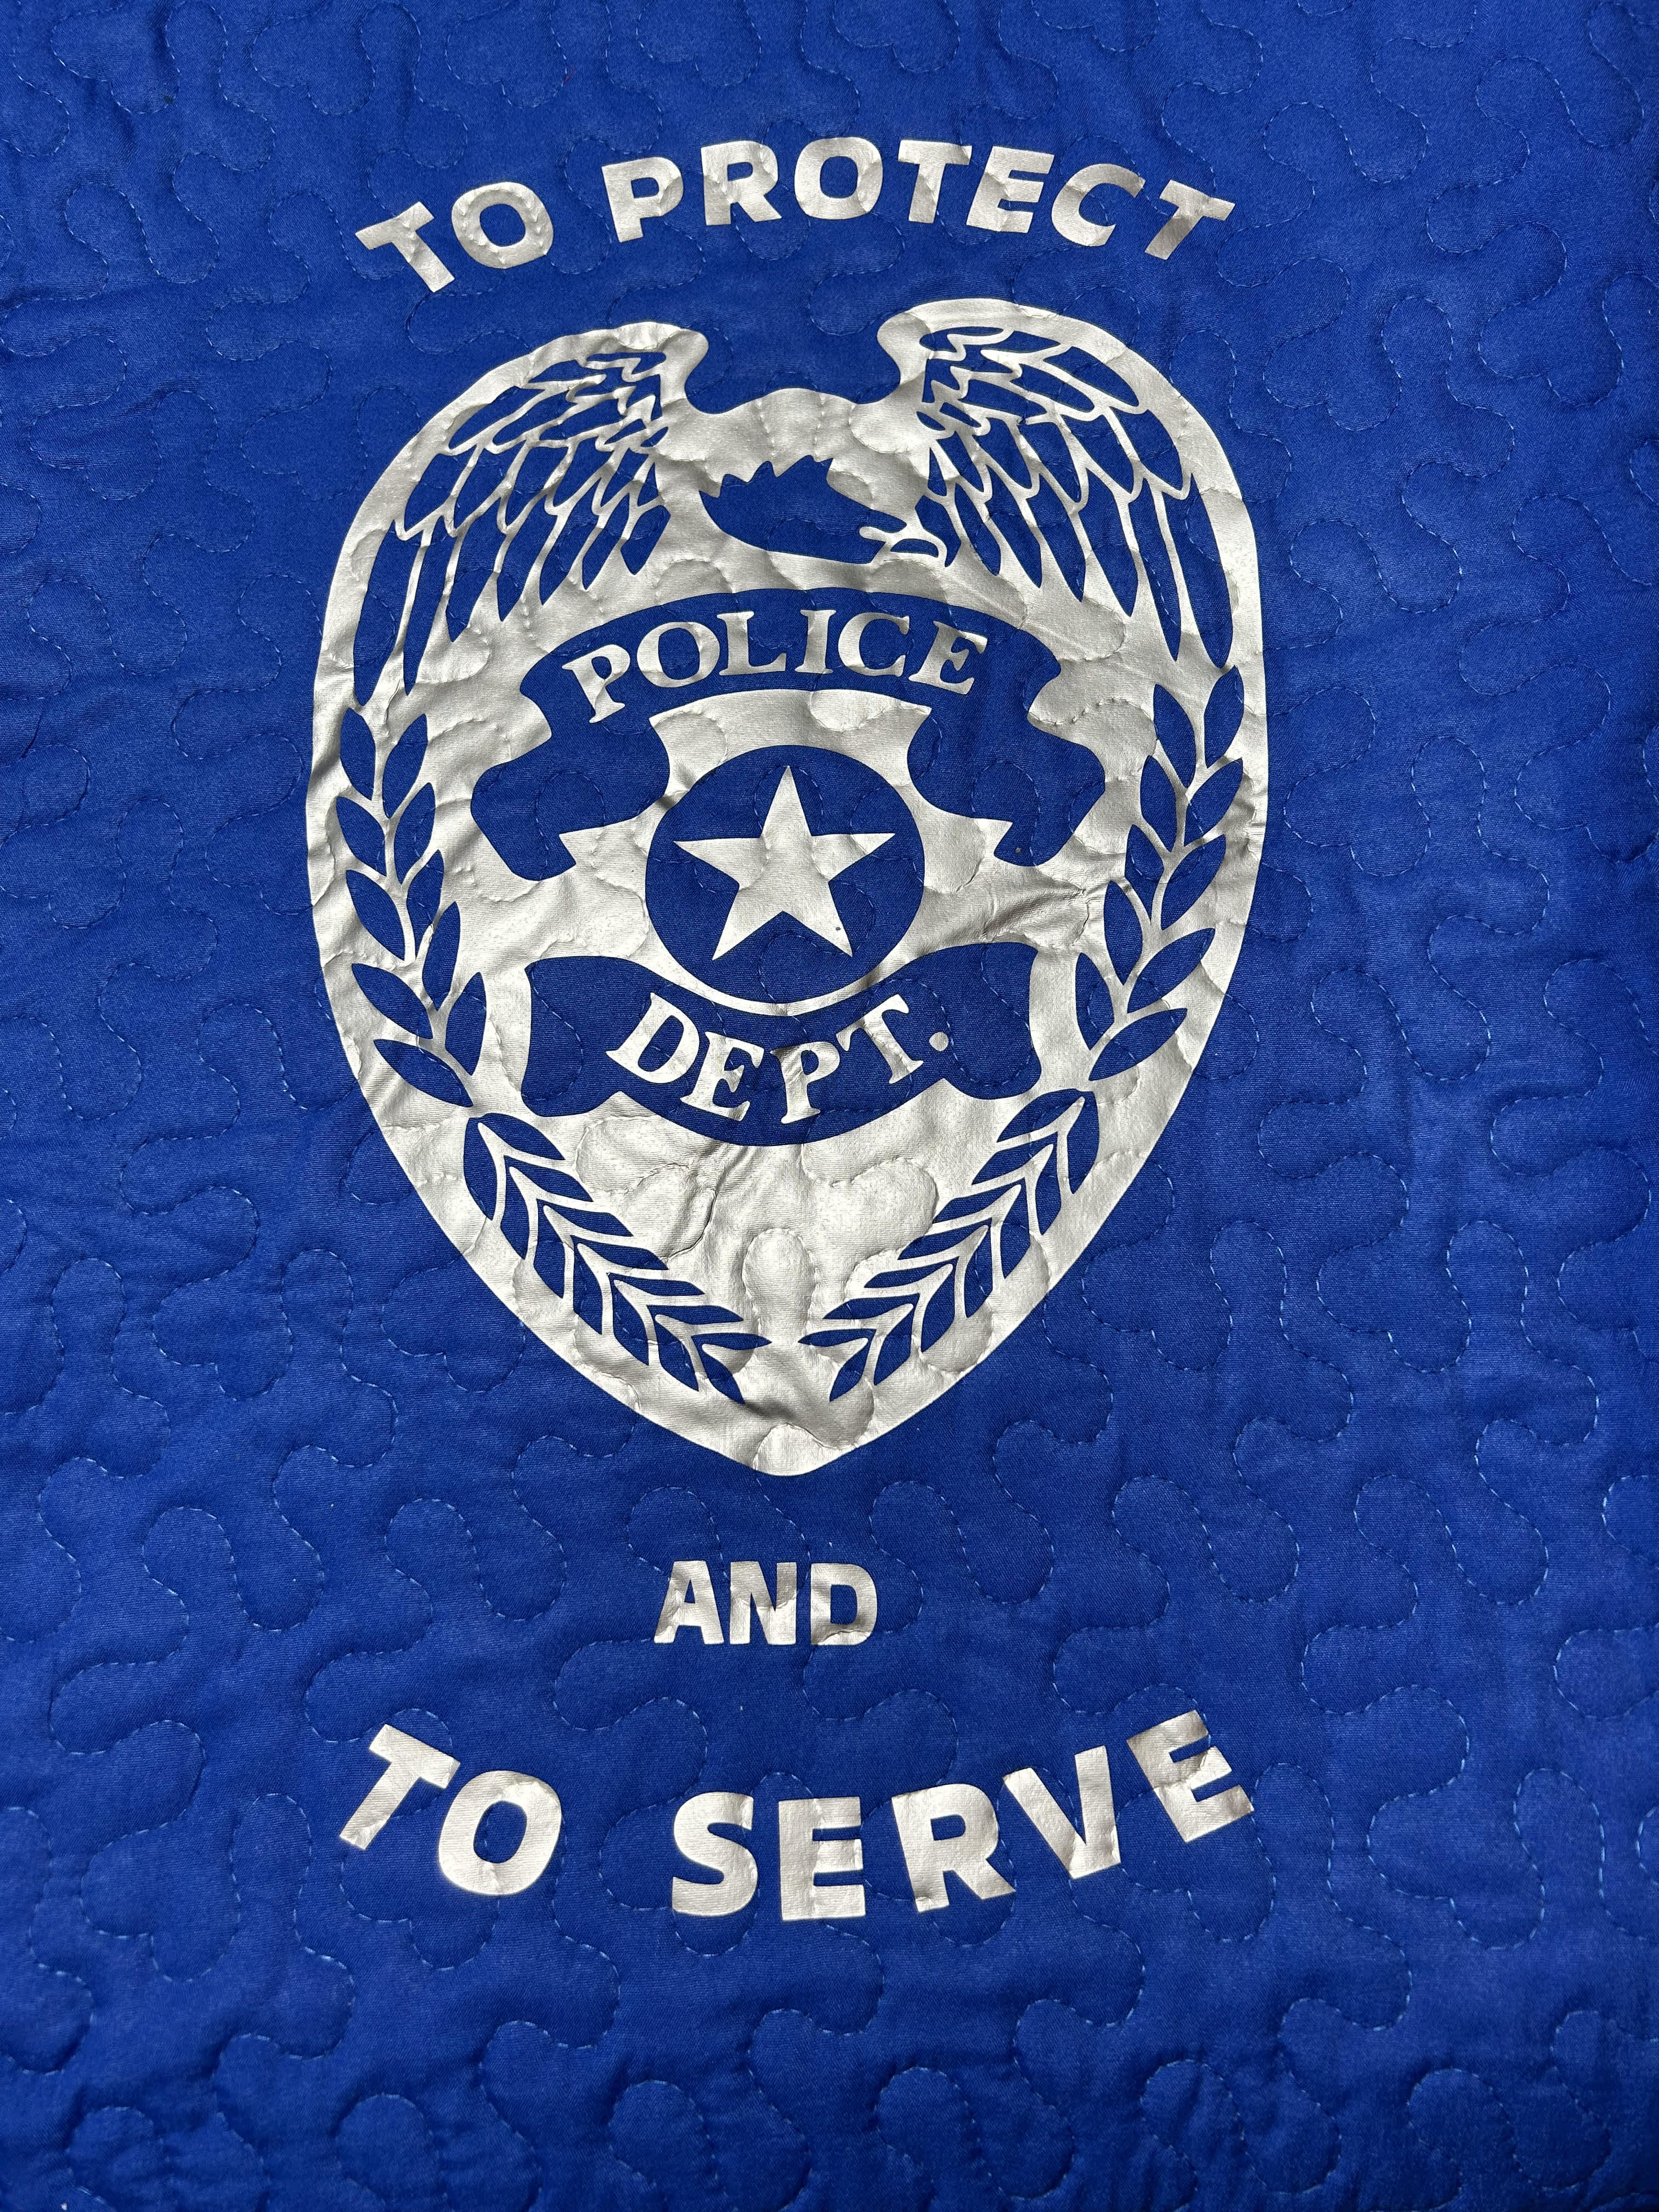 To Protect and To Service Police Quilted Throw - This Quilt would be the perfect gift for a retiring police officer, for the family of an officer that has passed on or birthday. Quilt has scalloped edging and is 50 x 60 in size.   Easel is 15.00 extra, Choose Deluxe to add easel to order for presentation. 